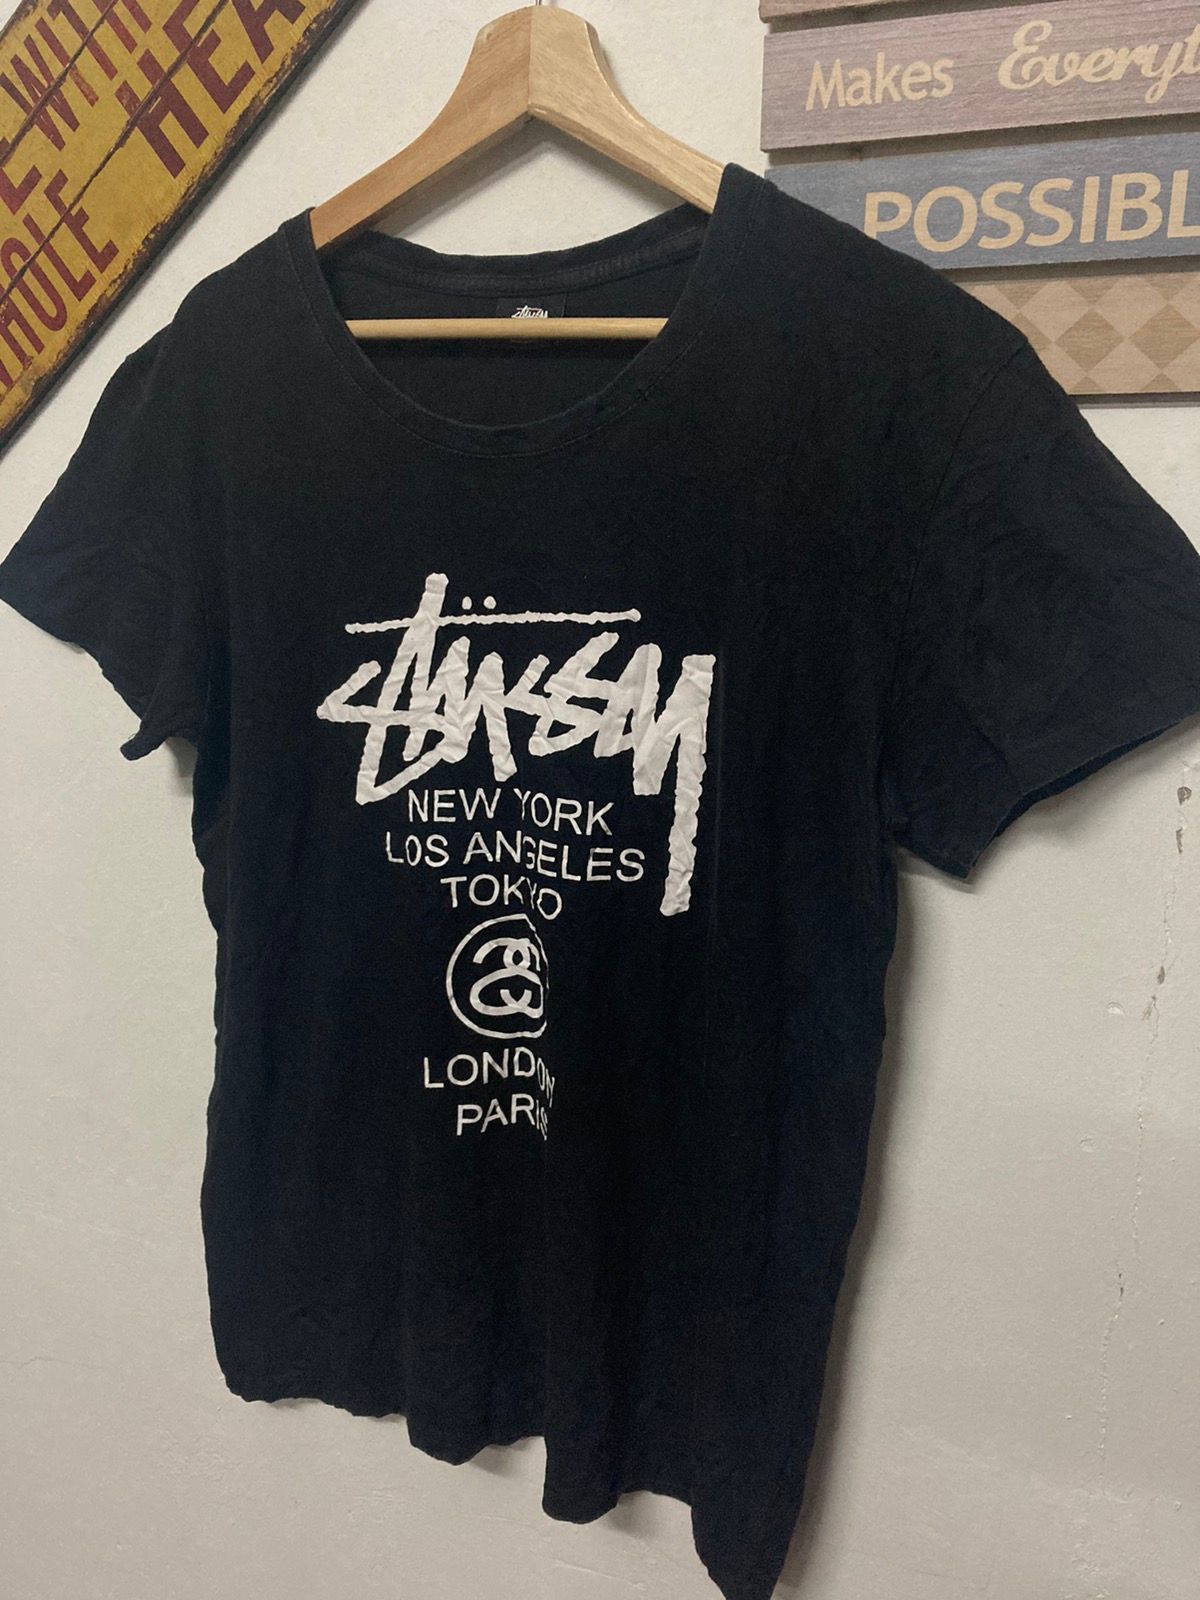 Stussy Tour Shirt For Women in XL size - 5